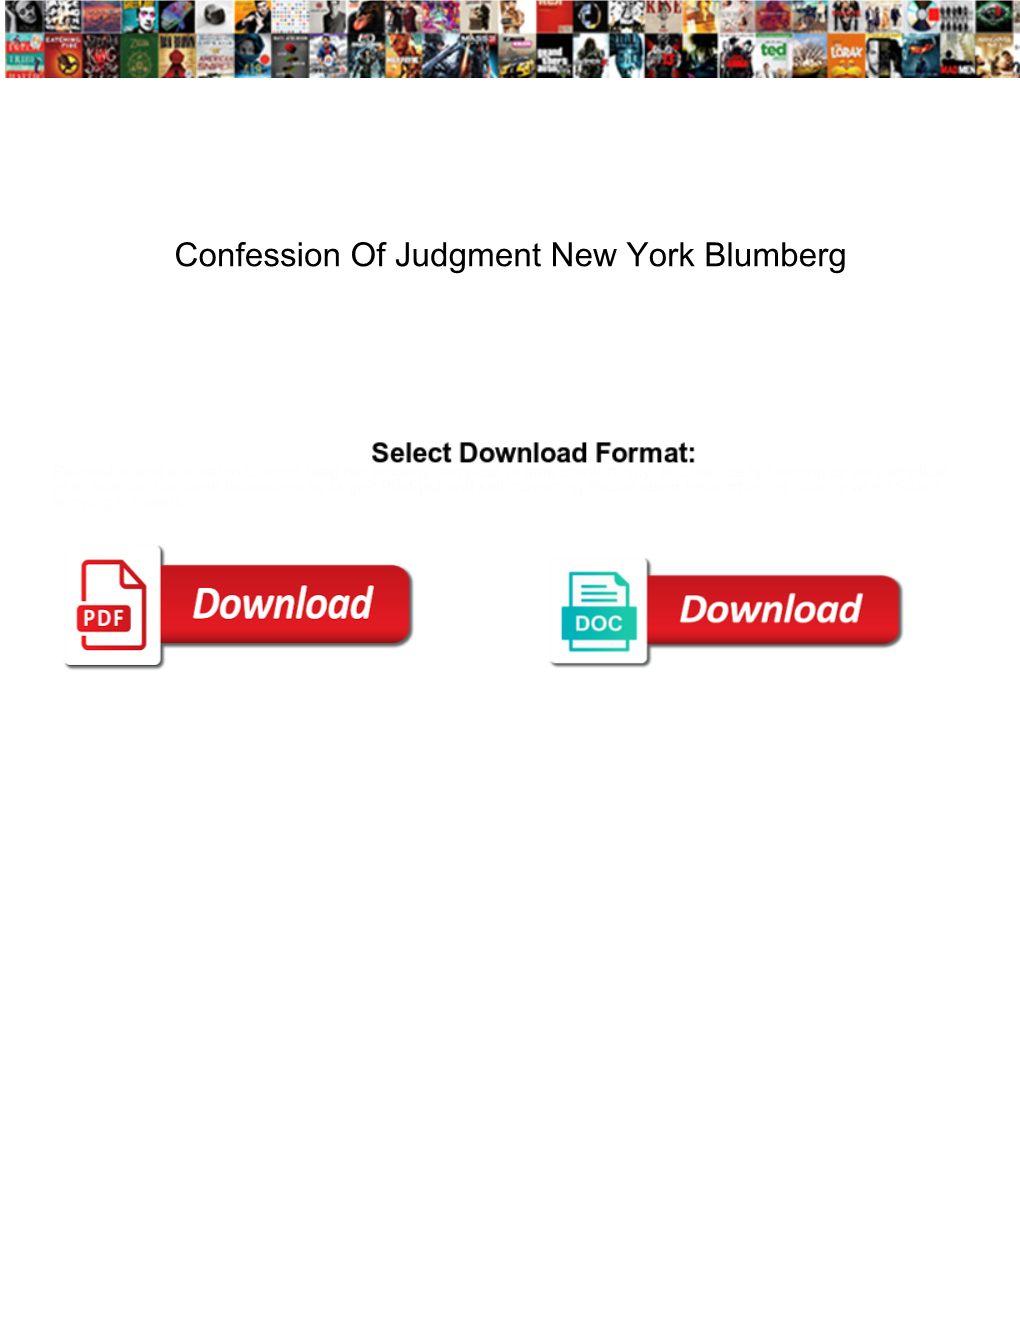 Confession of Judgment New York Blumberg